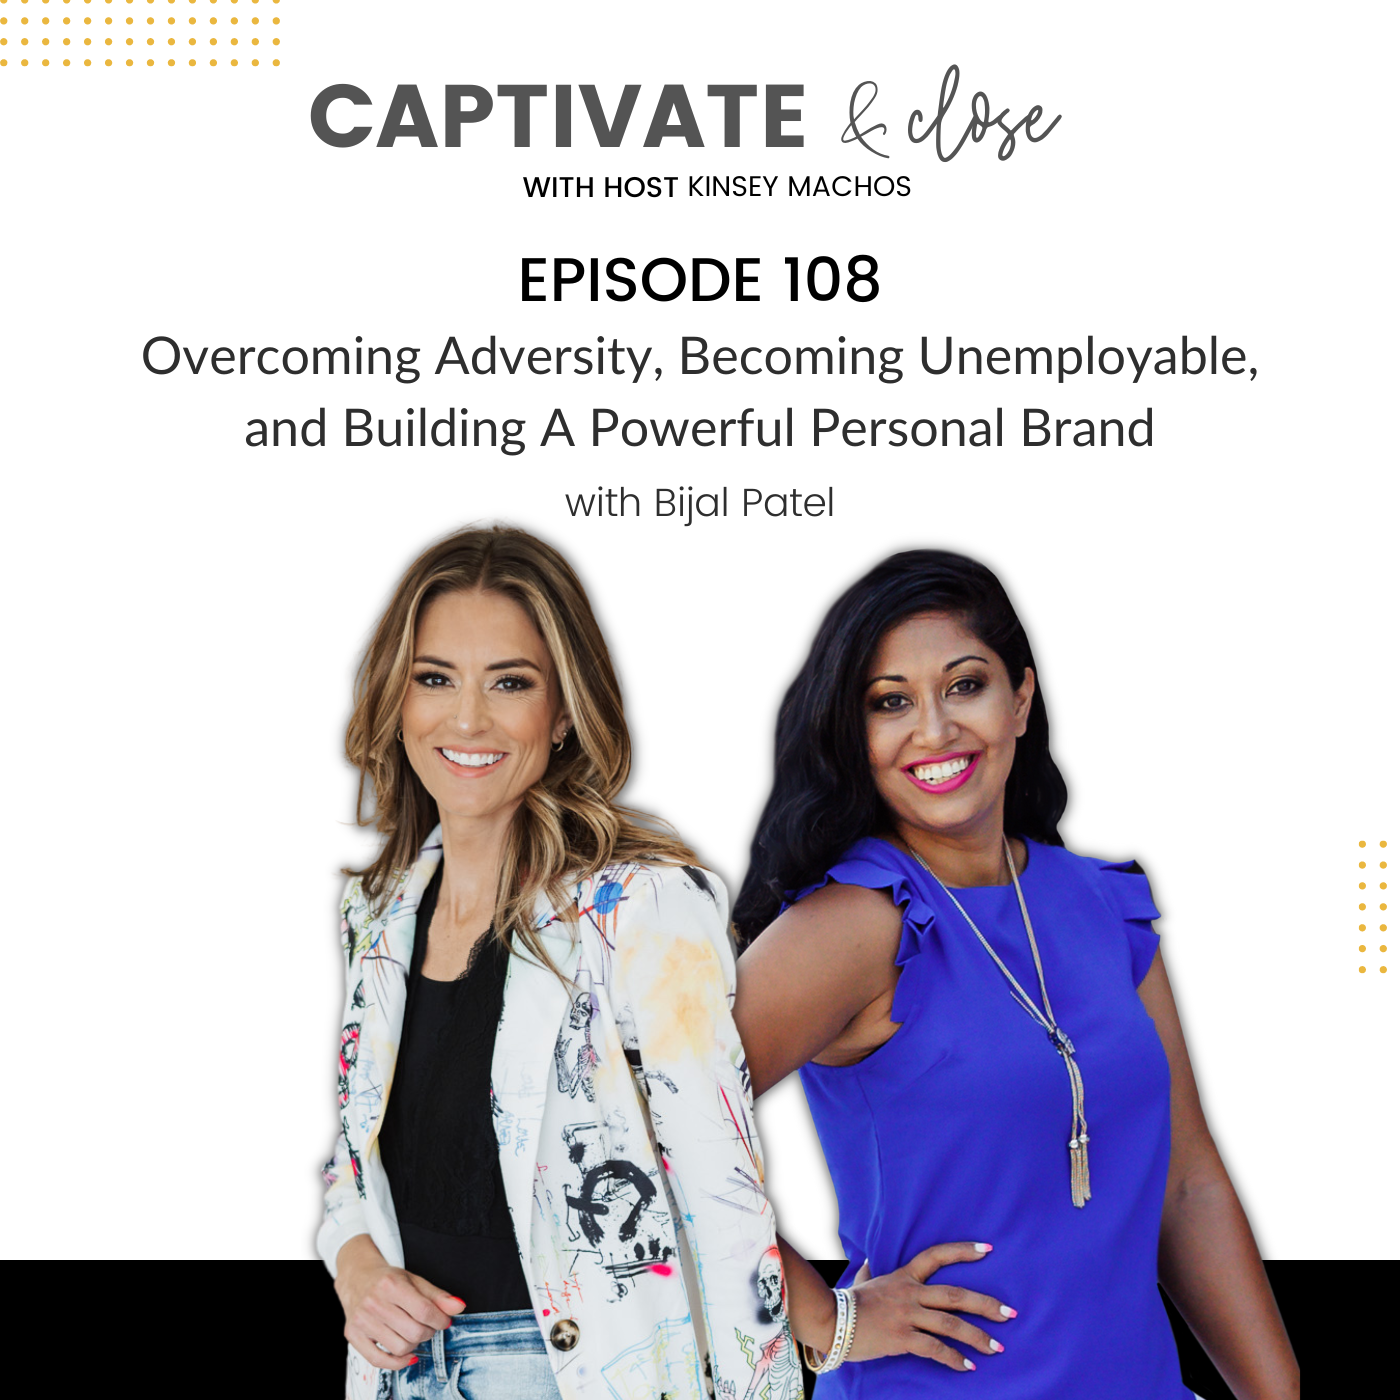 Overcoming Adversity, Becoming Unemployable, and Building A Powerful Personal Brand With Bijal Patel